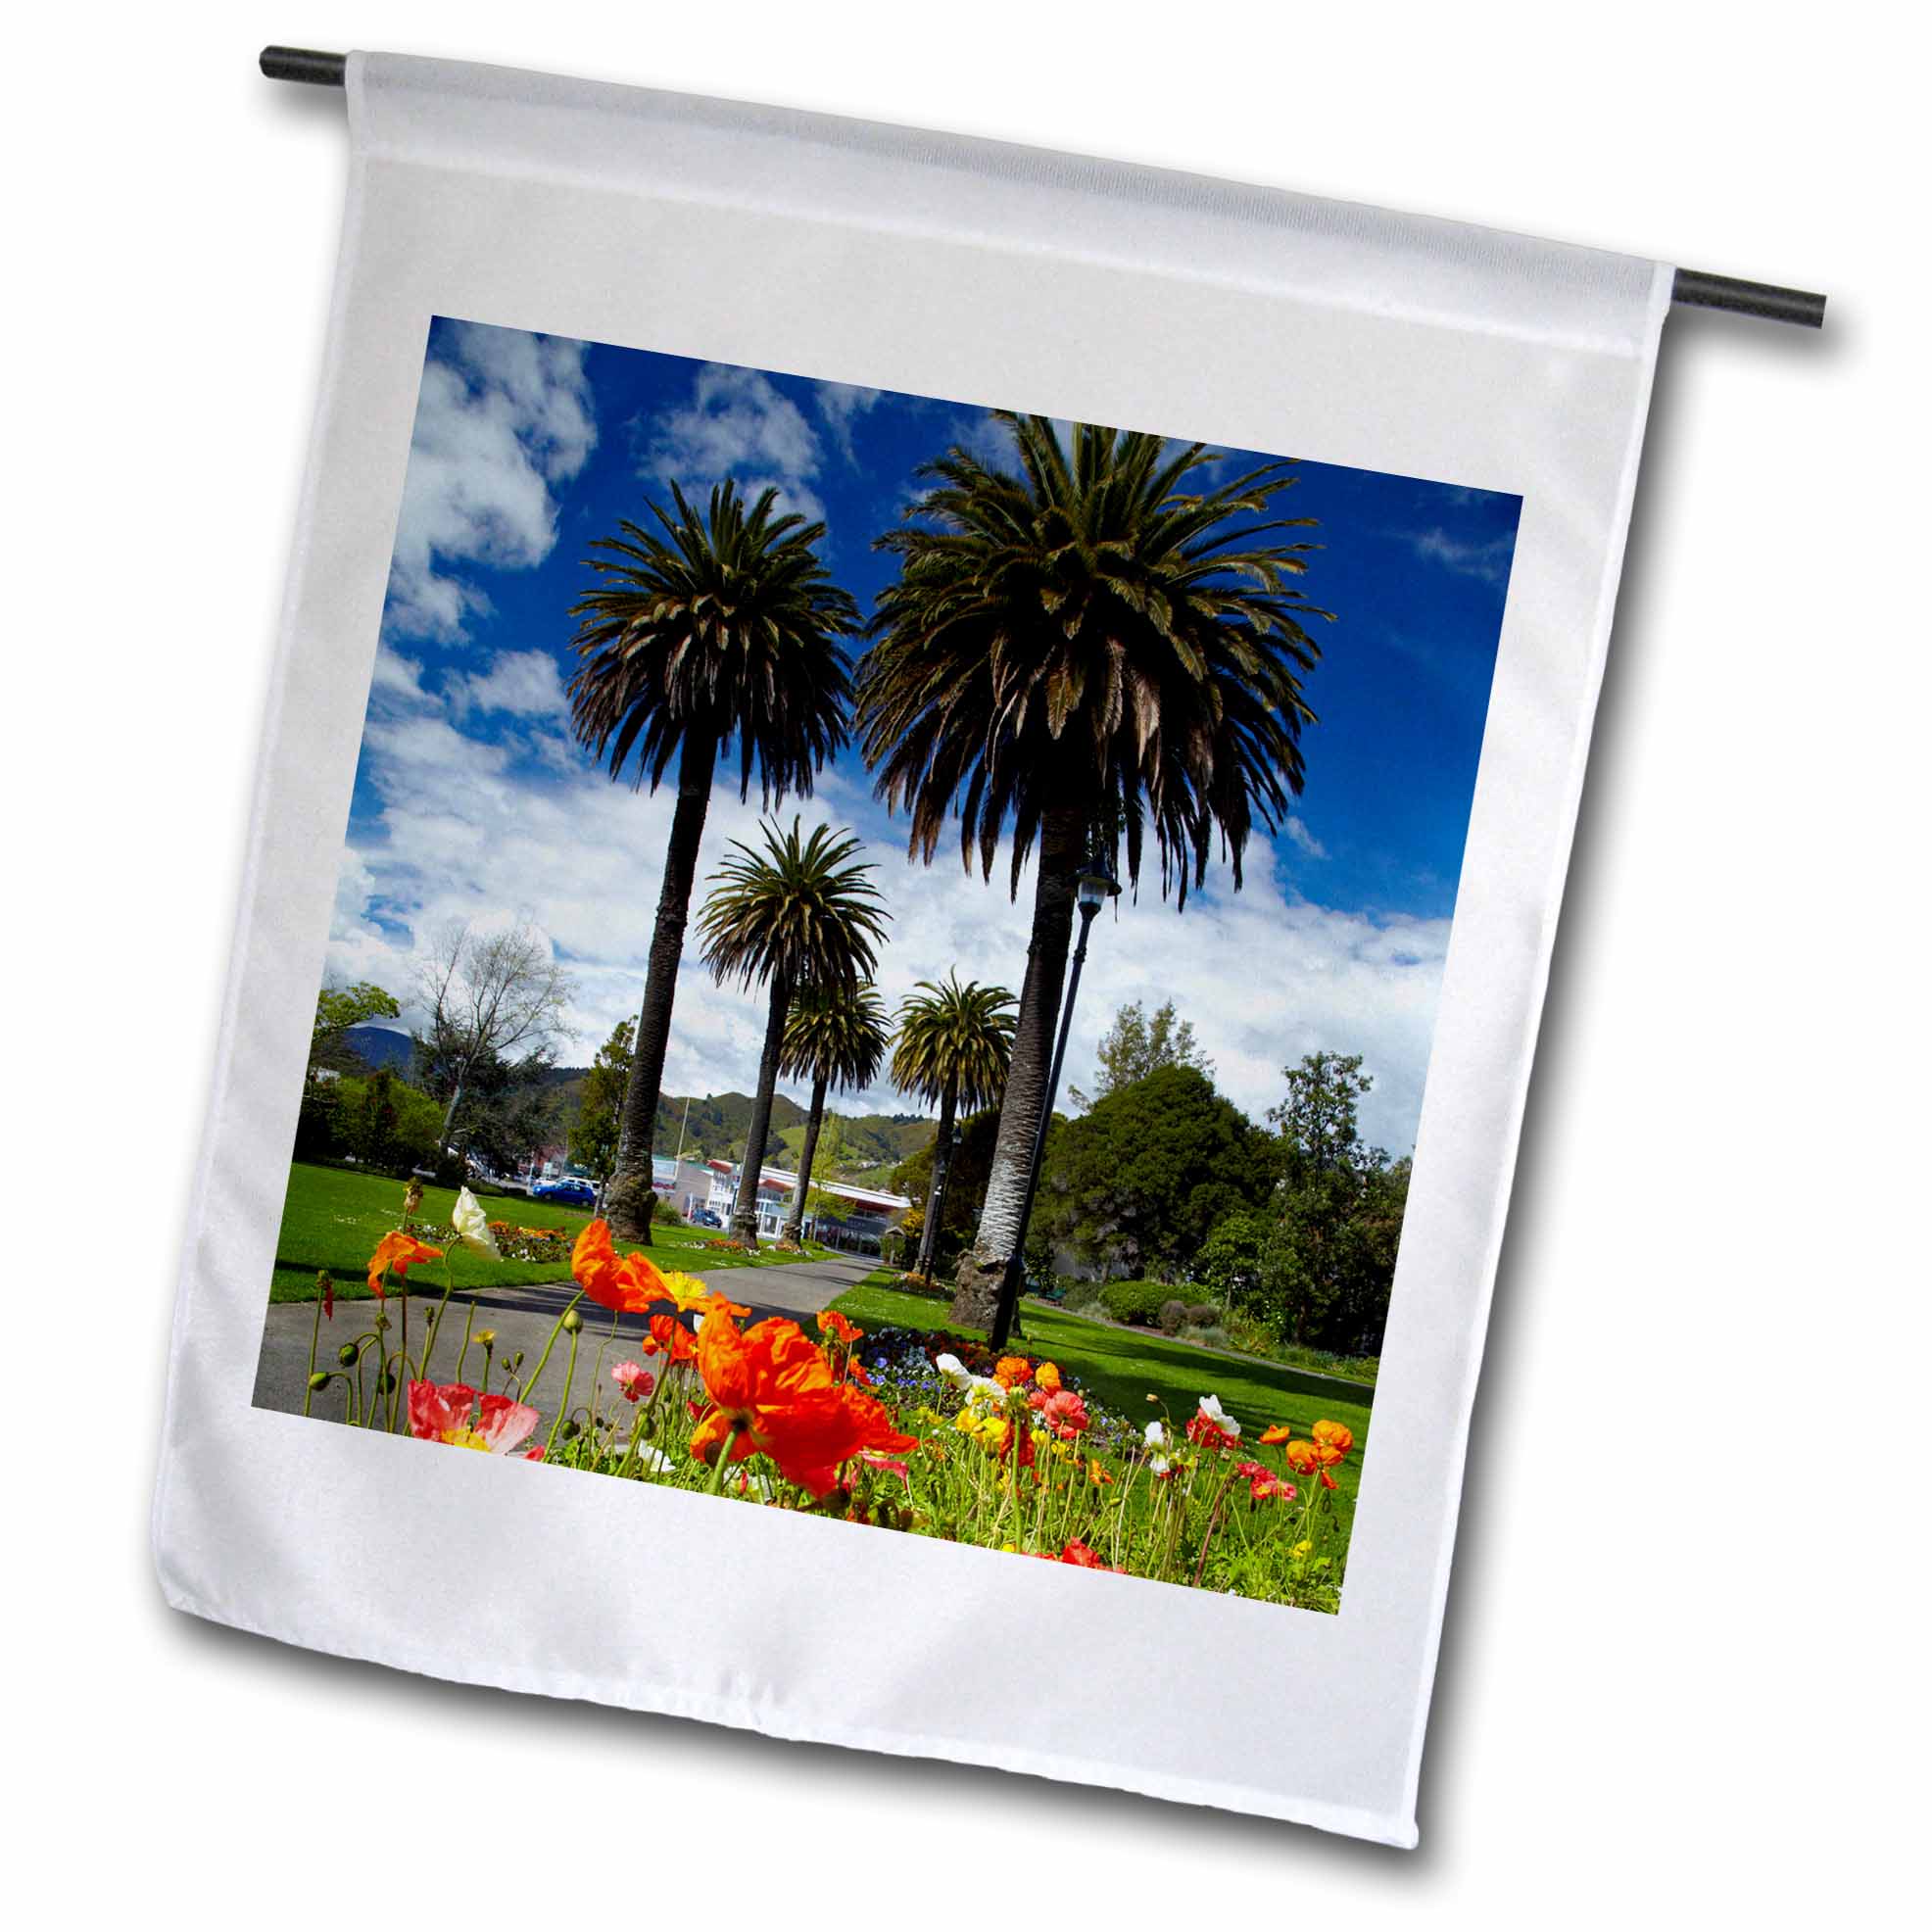 3dRose Poppies and palm trees, Anzac Park, Nelson, South Island, New Zealand. - Garden Flag, 12 by 18-inch - image 1 of 1